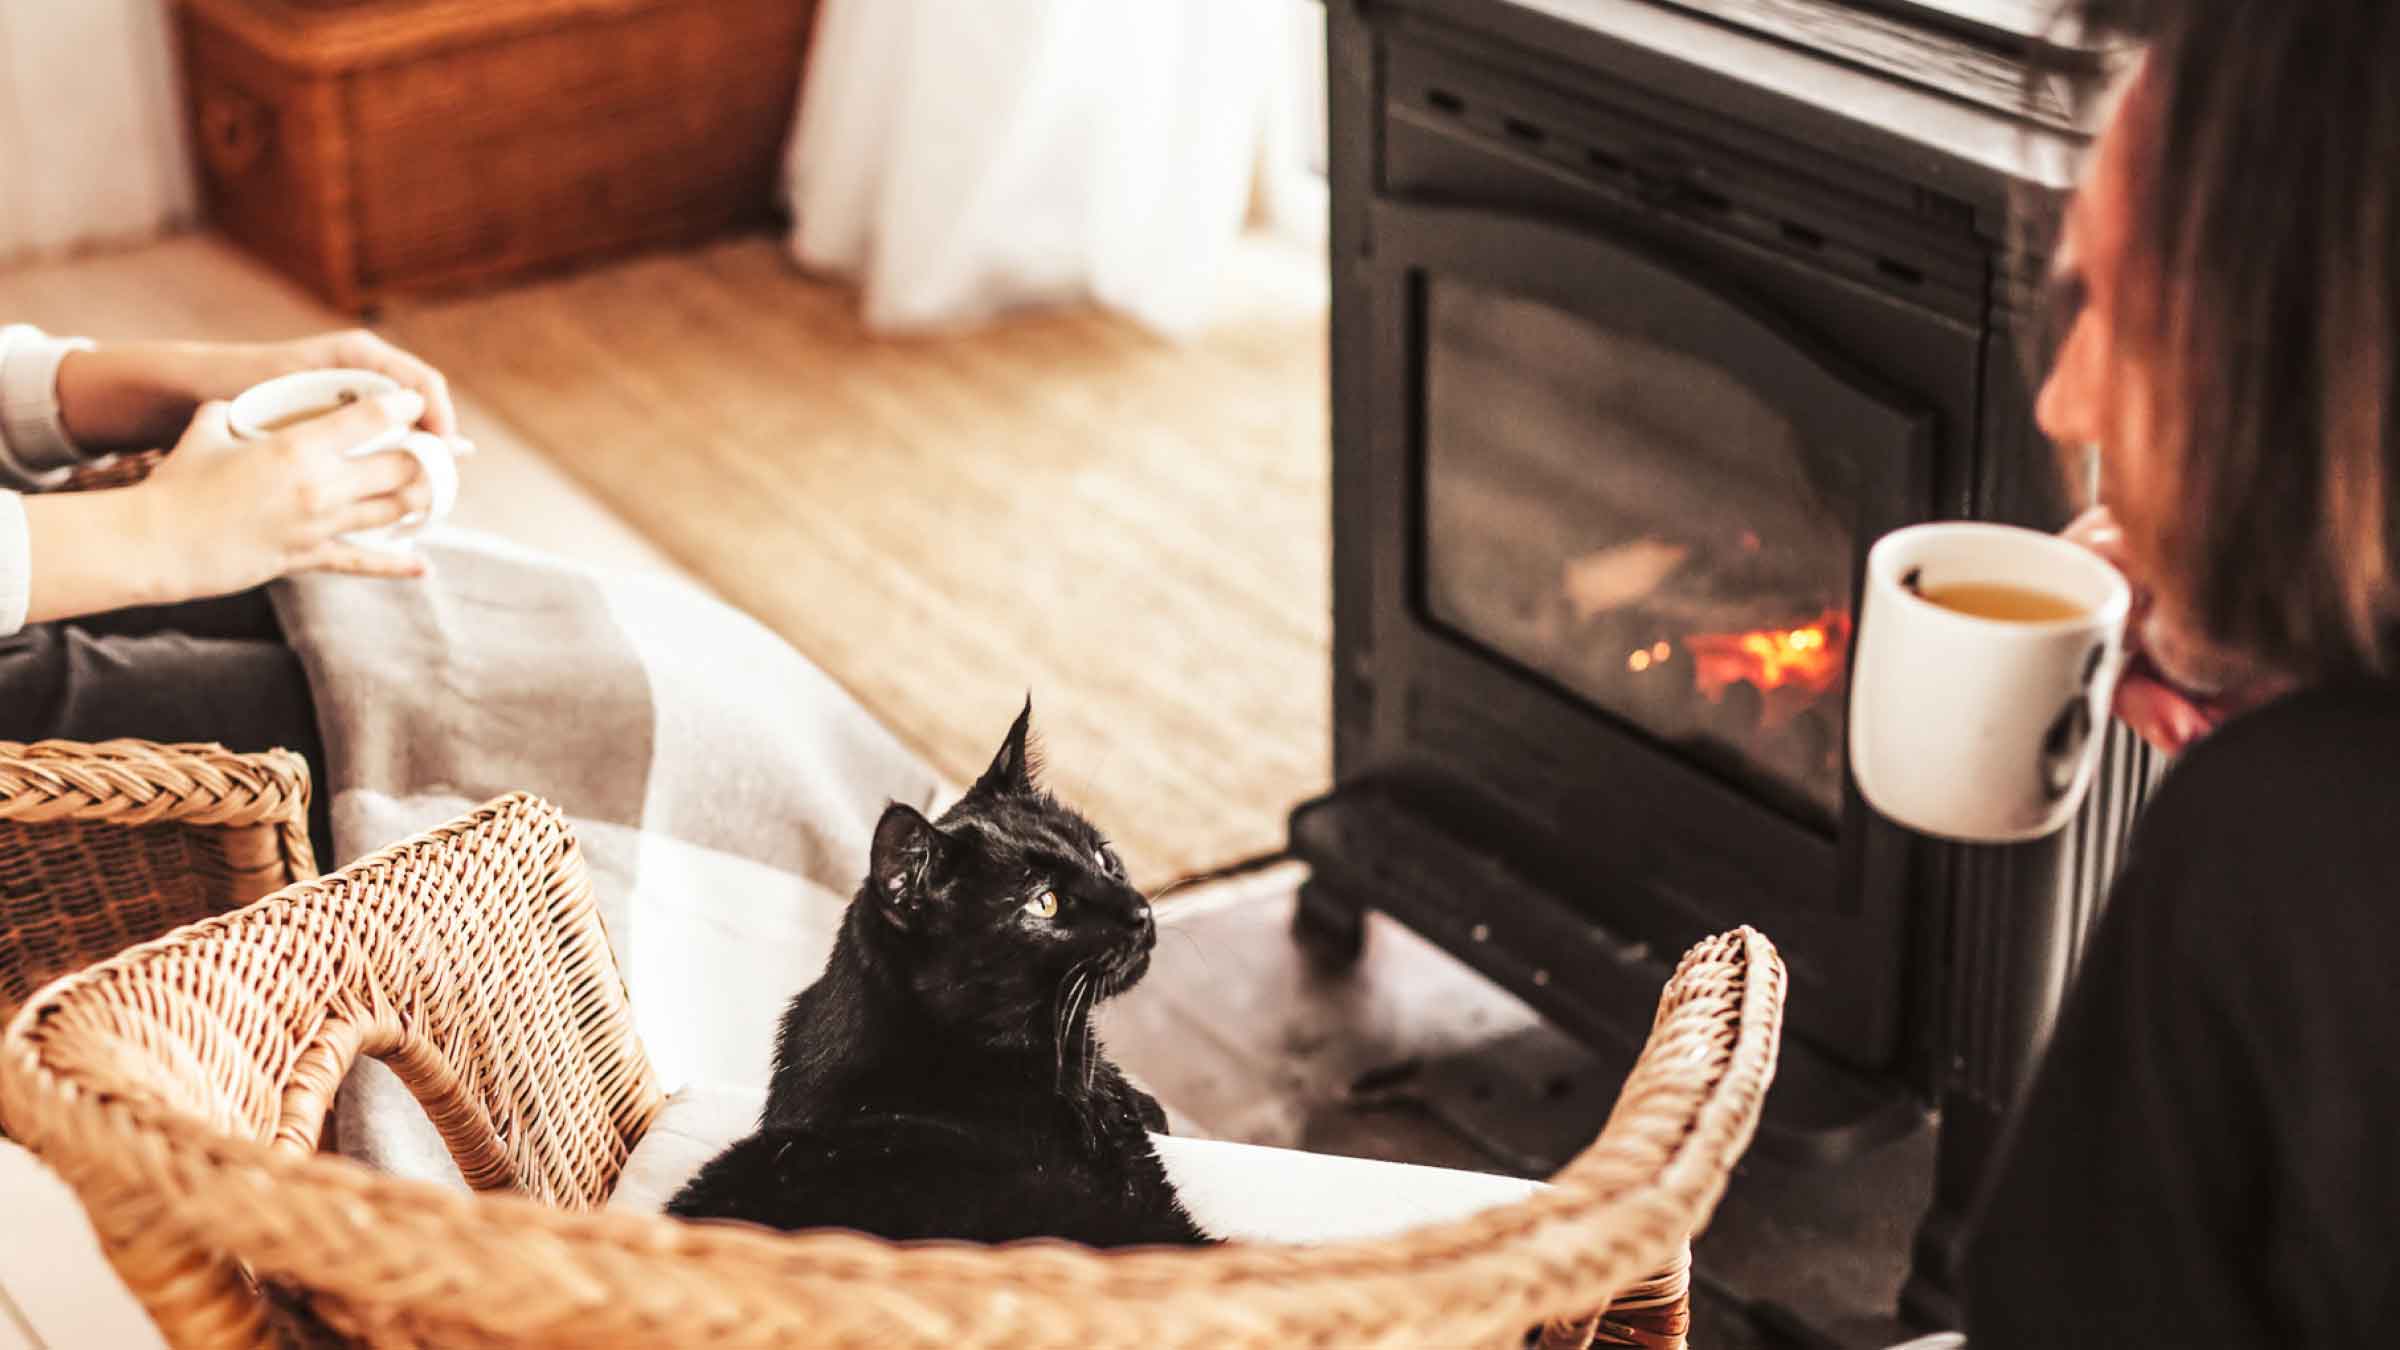 Cosy living room with a cast iron freestanding fireplace. Cat sits in front of it on a chair looking up at its owner drinking tea.